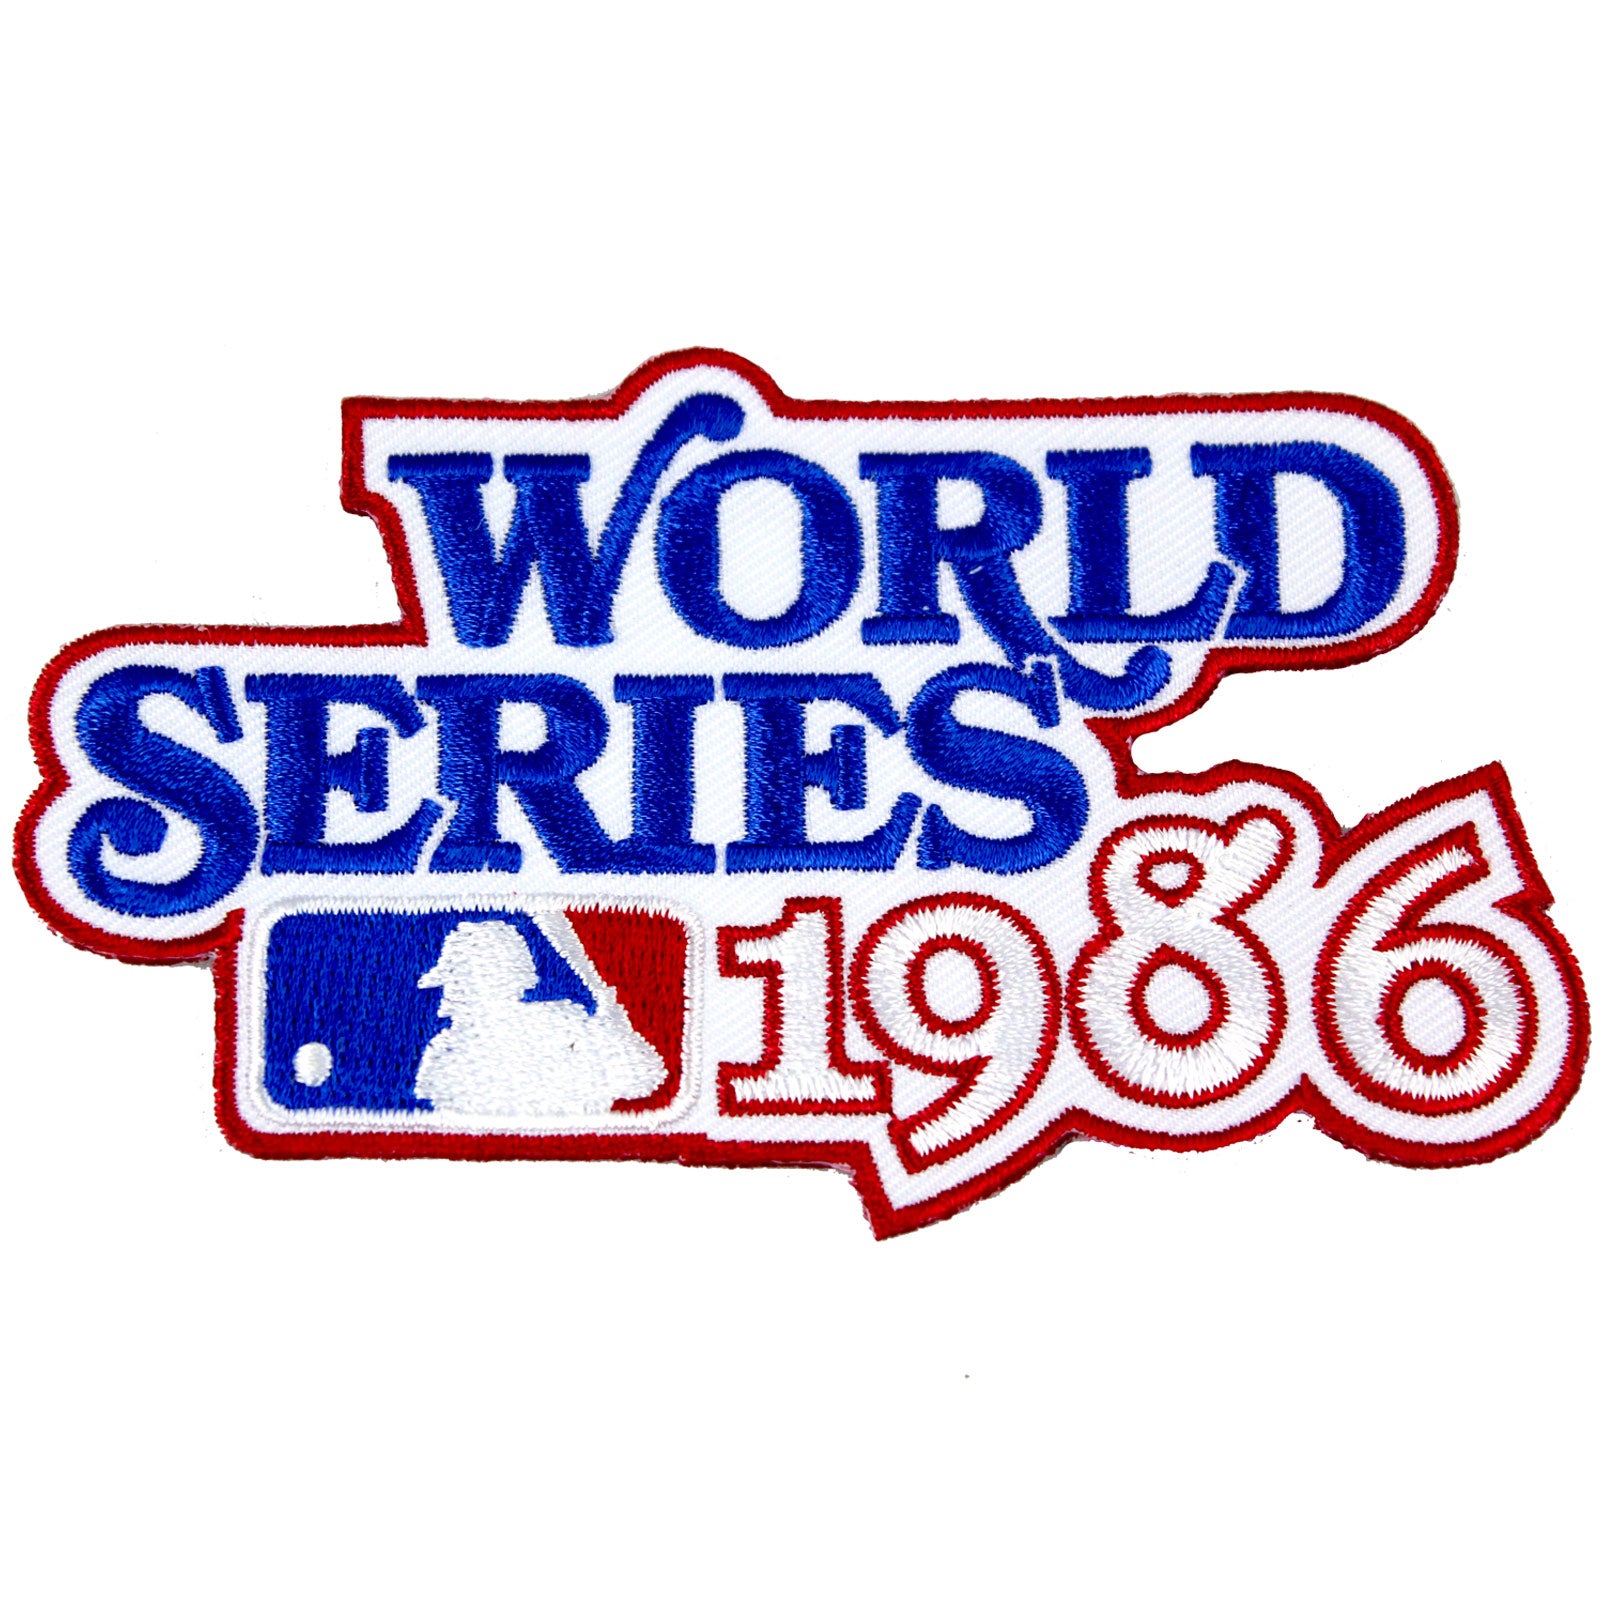 1986 MLB World Series Logo Jersey Patch New York Mets vs. Boston Red Sox by Patch Collection